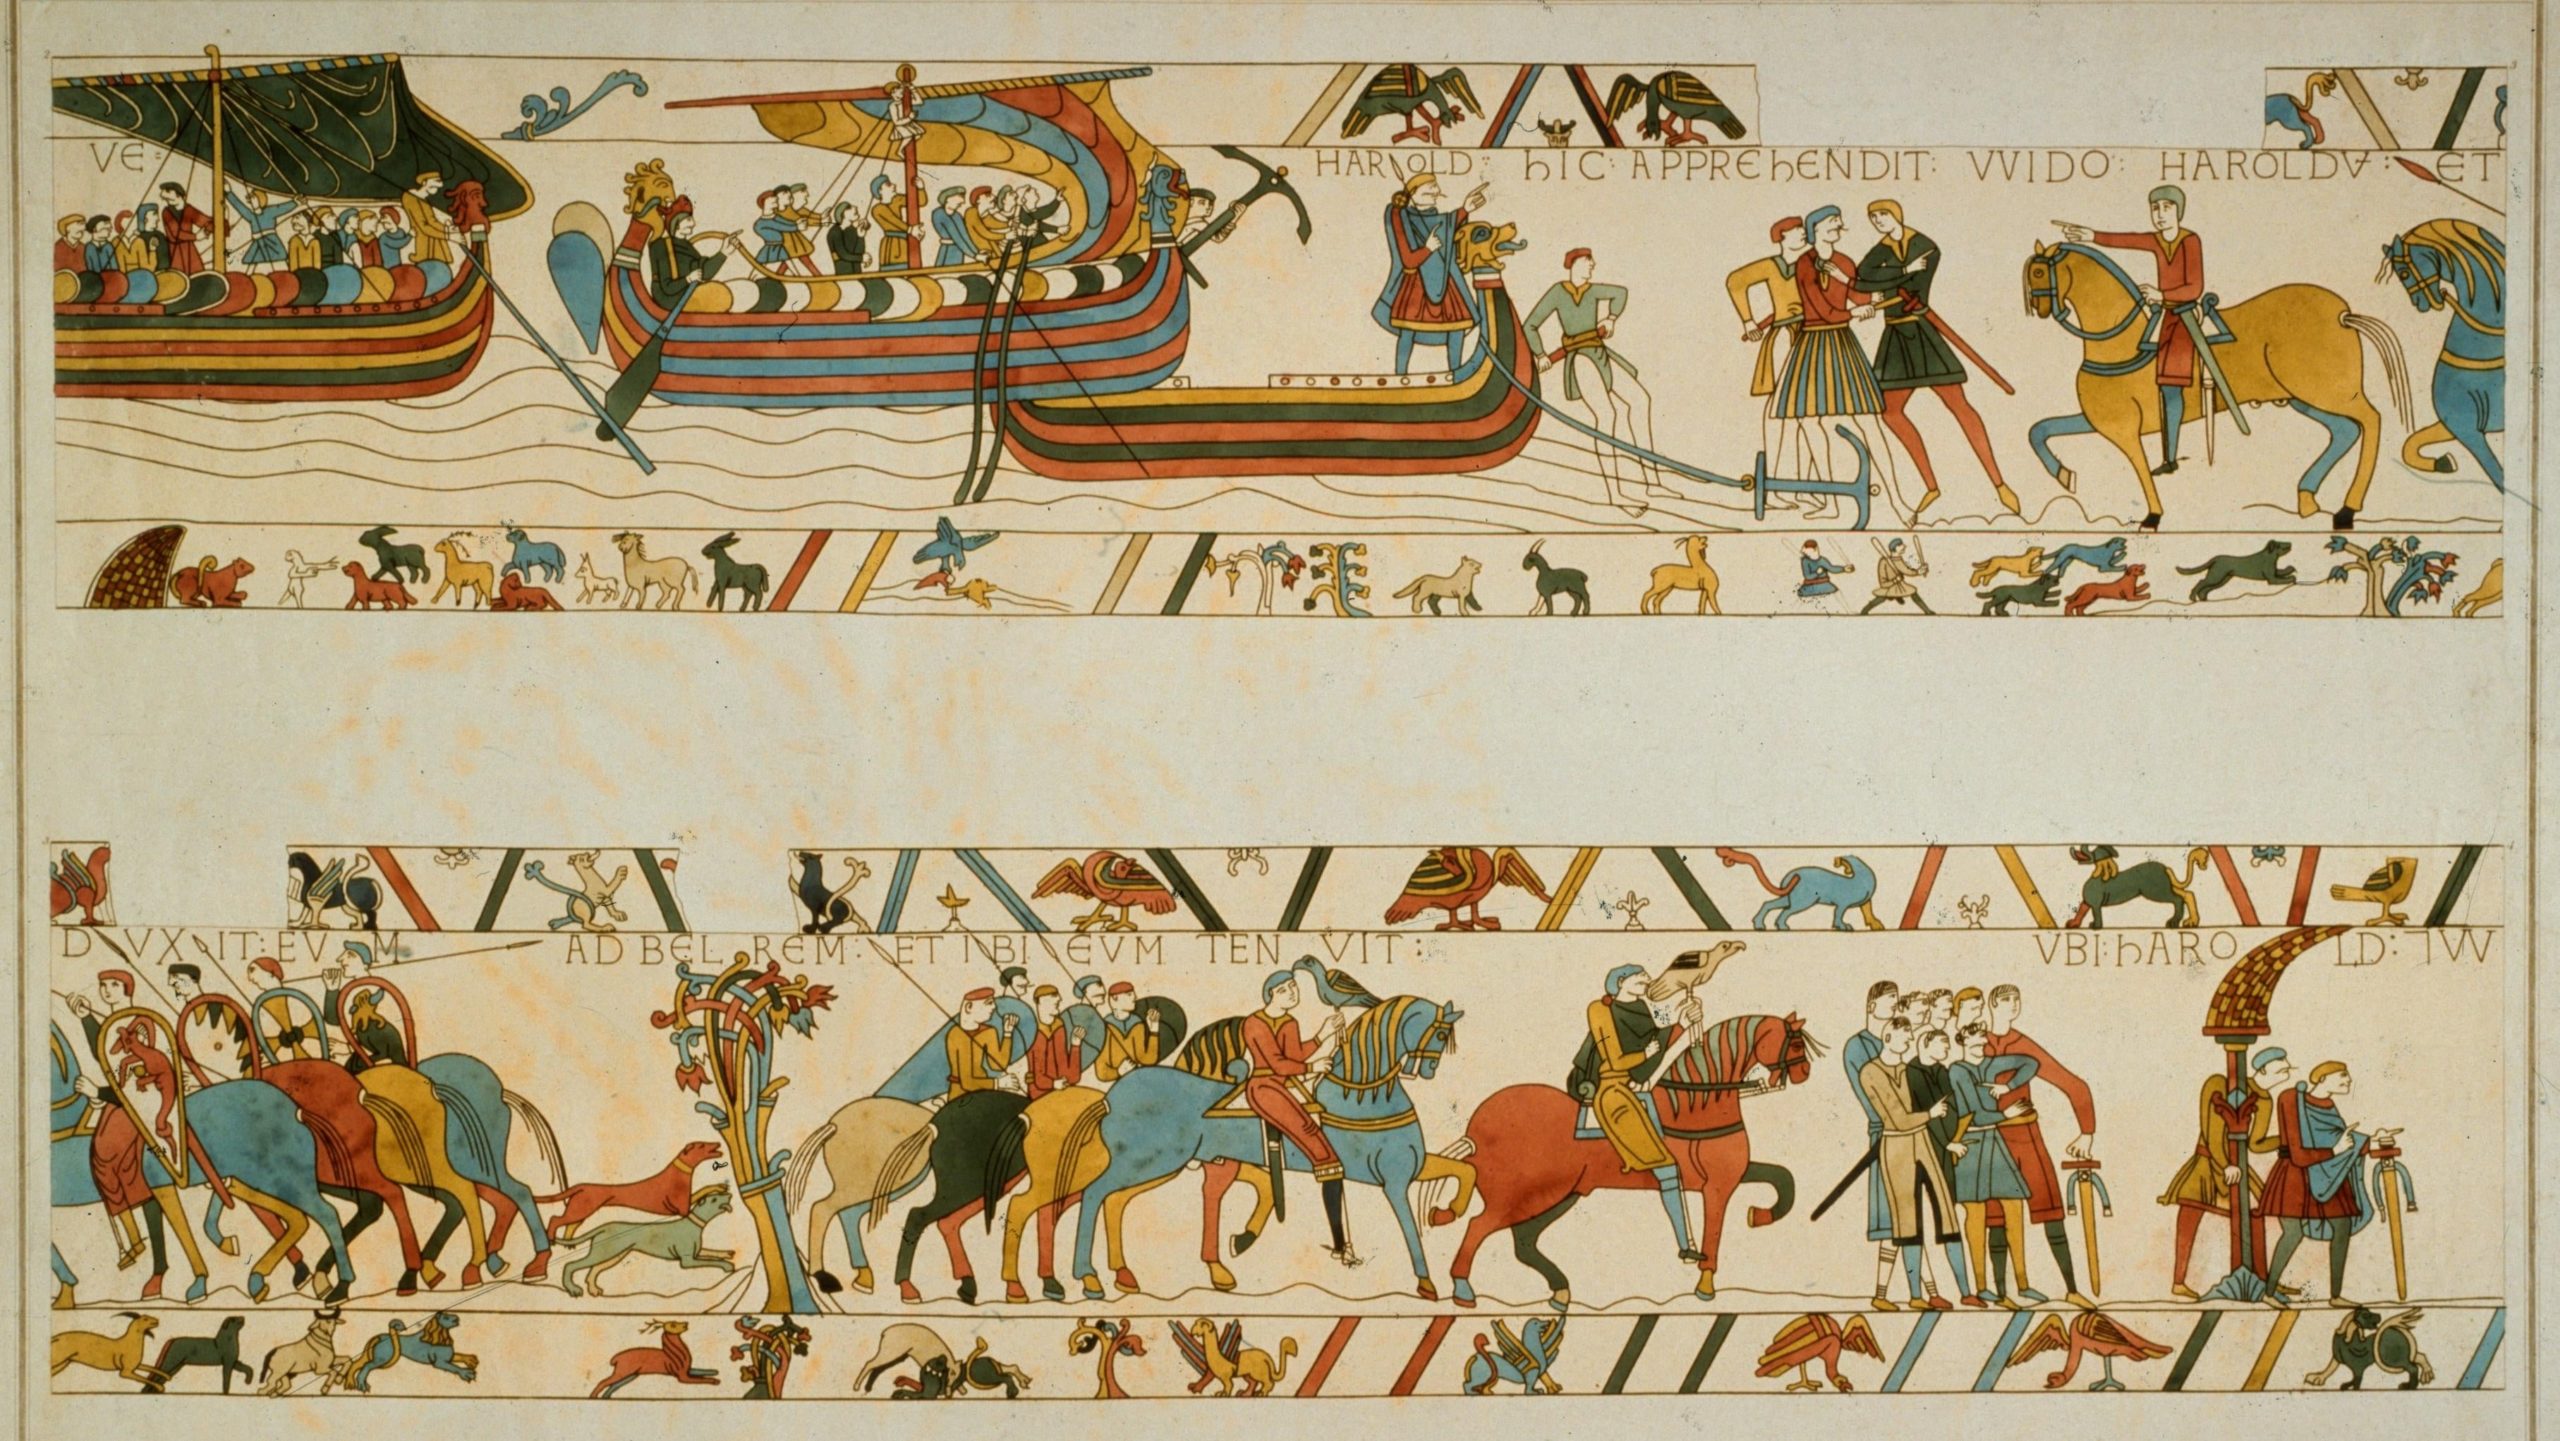 The Bayeux Tapestry (dating to the 11th century) depicts the army of future King Harold II of England landing in Normandy. (Photo: Hulton Archive, Getty Images)